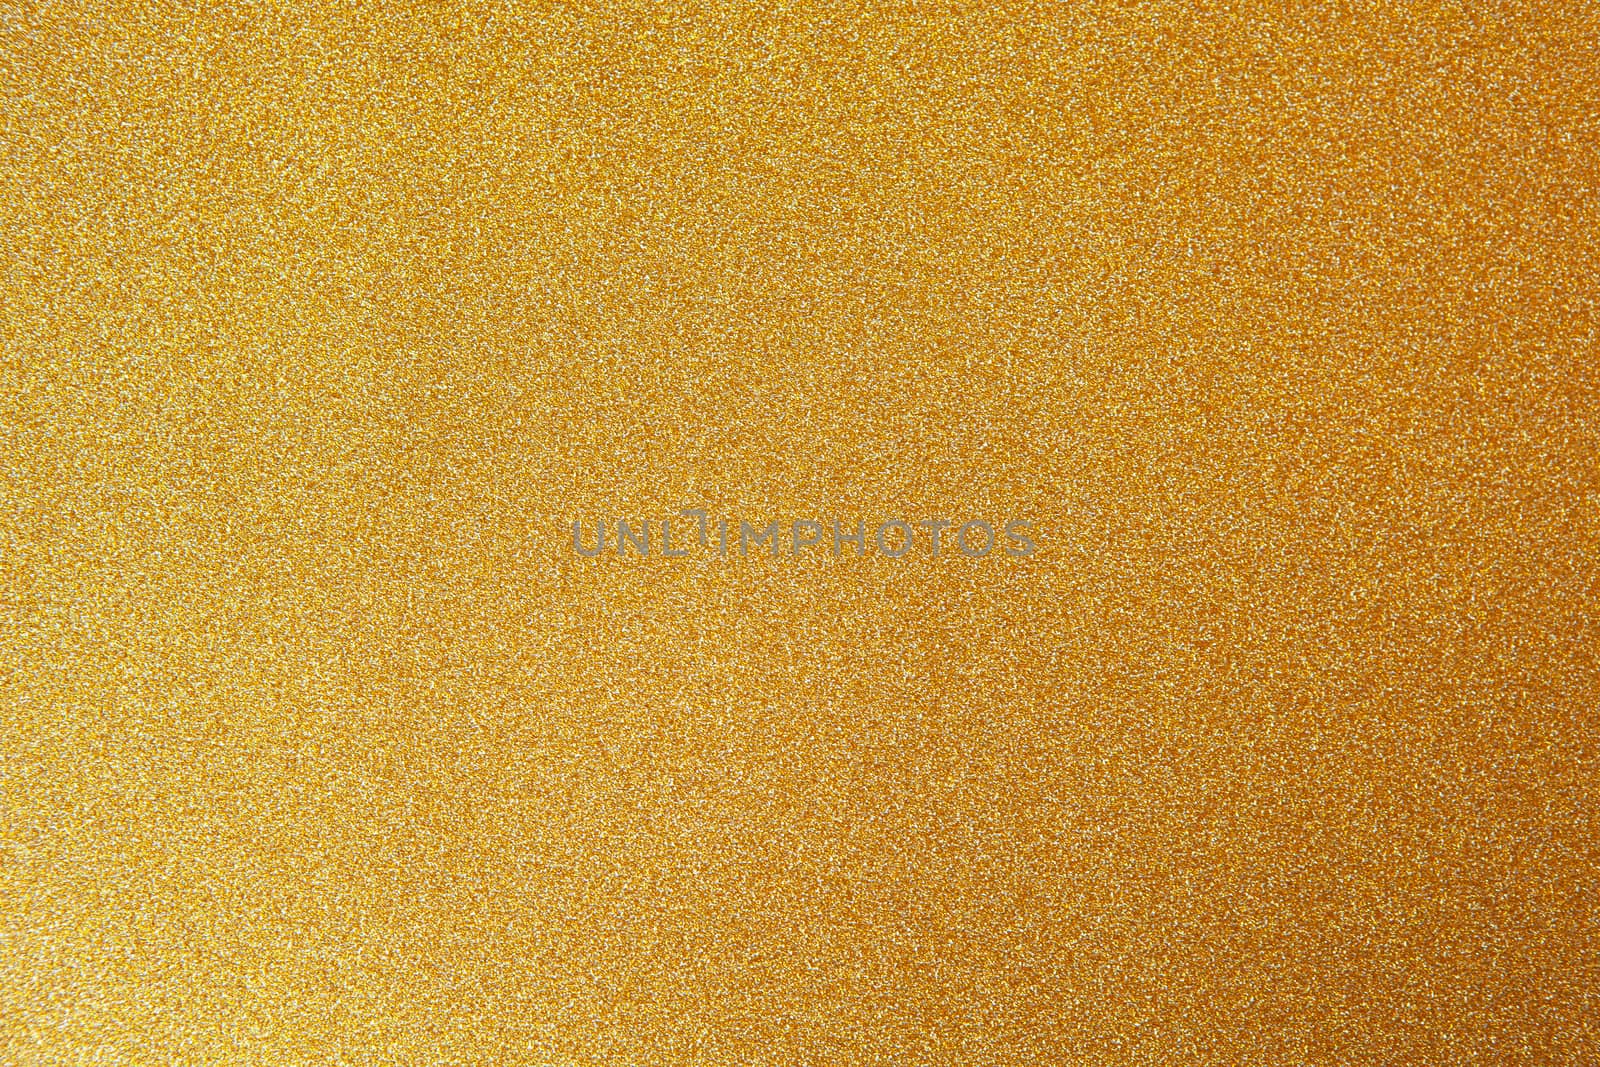 Gold festive background, close-up. Copy space for text. Horizontal. Celebration, holidays, sales, fashion concept, harvesting for mock up.